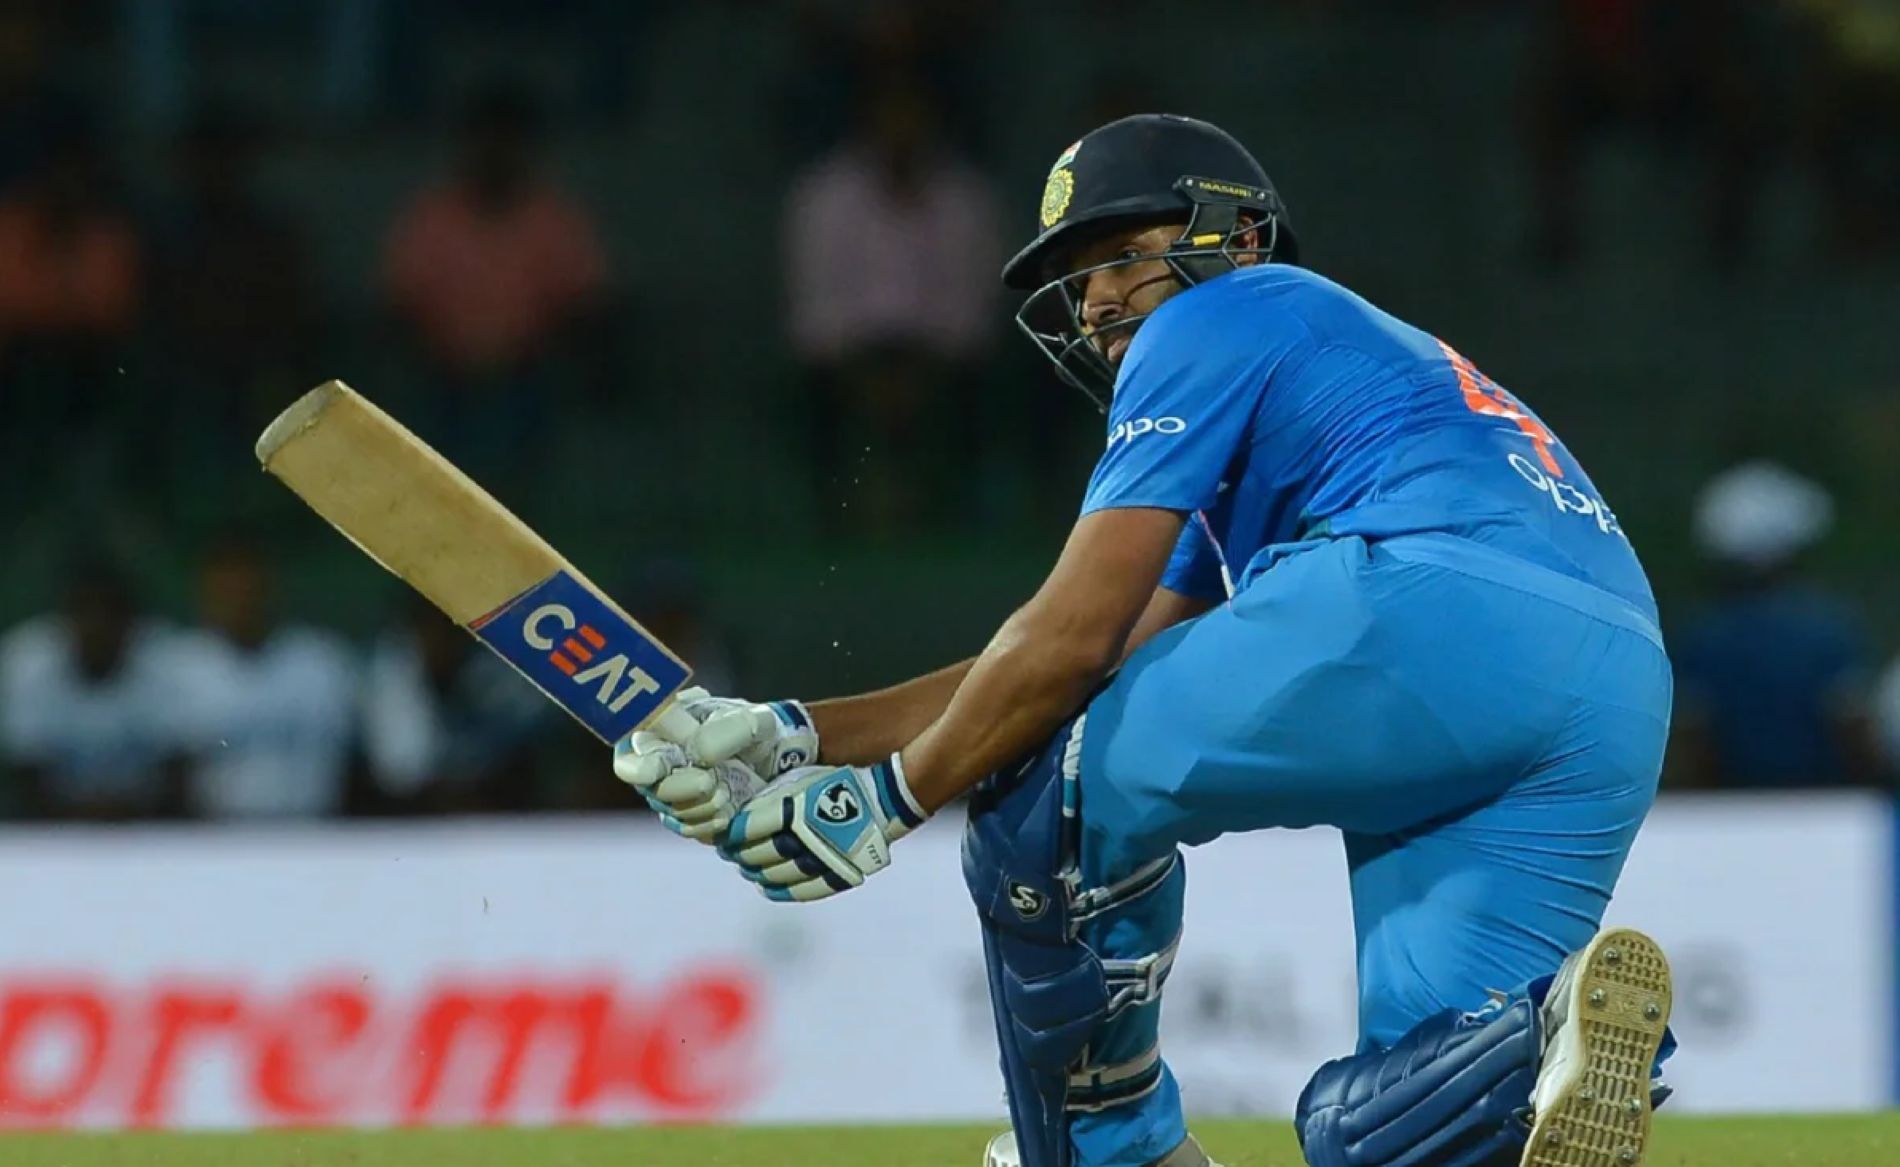 Rohit brought out his full array of strokes against Bangladesh.